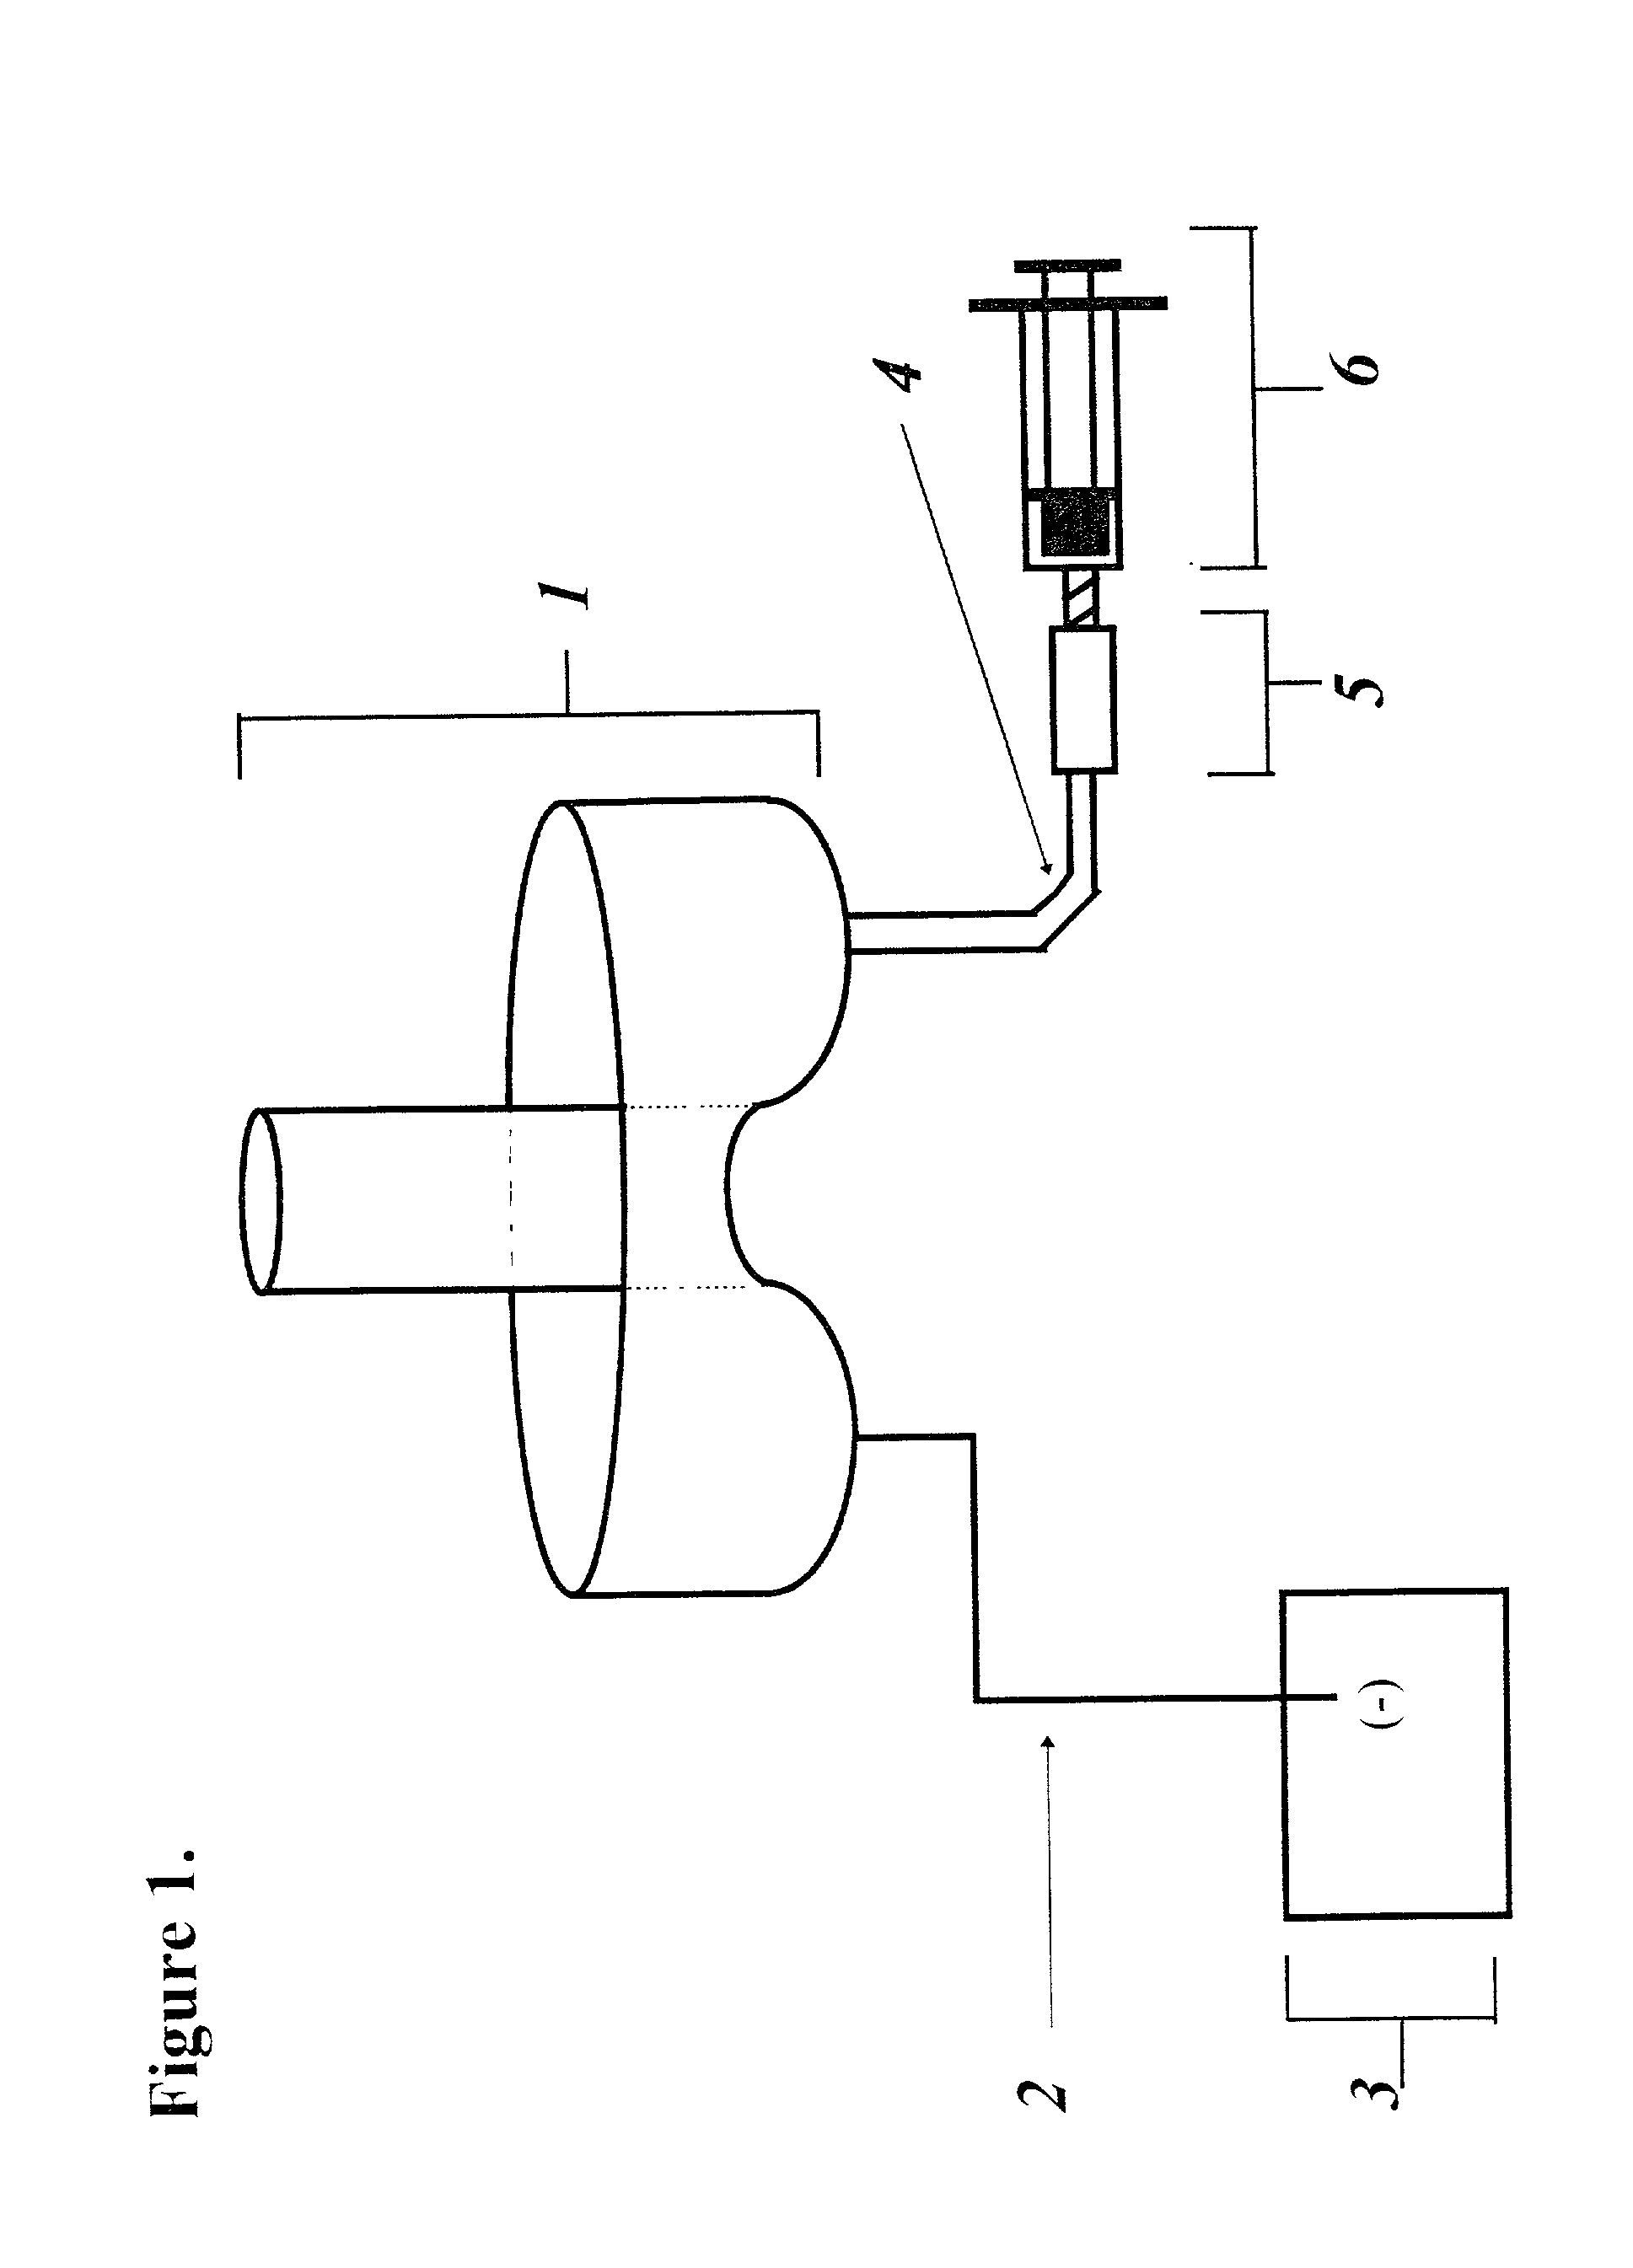 Method and invention for the treatment of diseases and disorders of the cervix